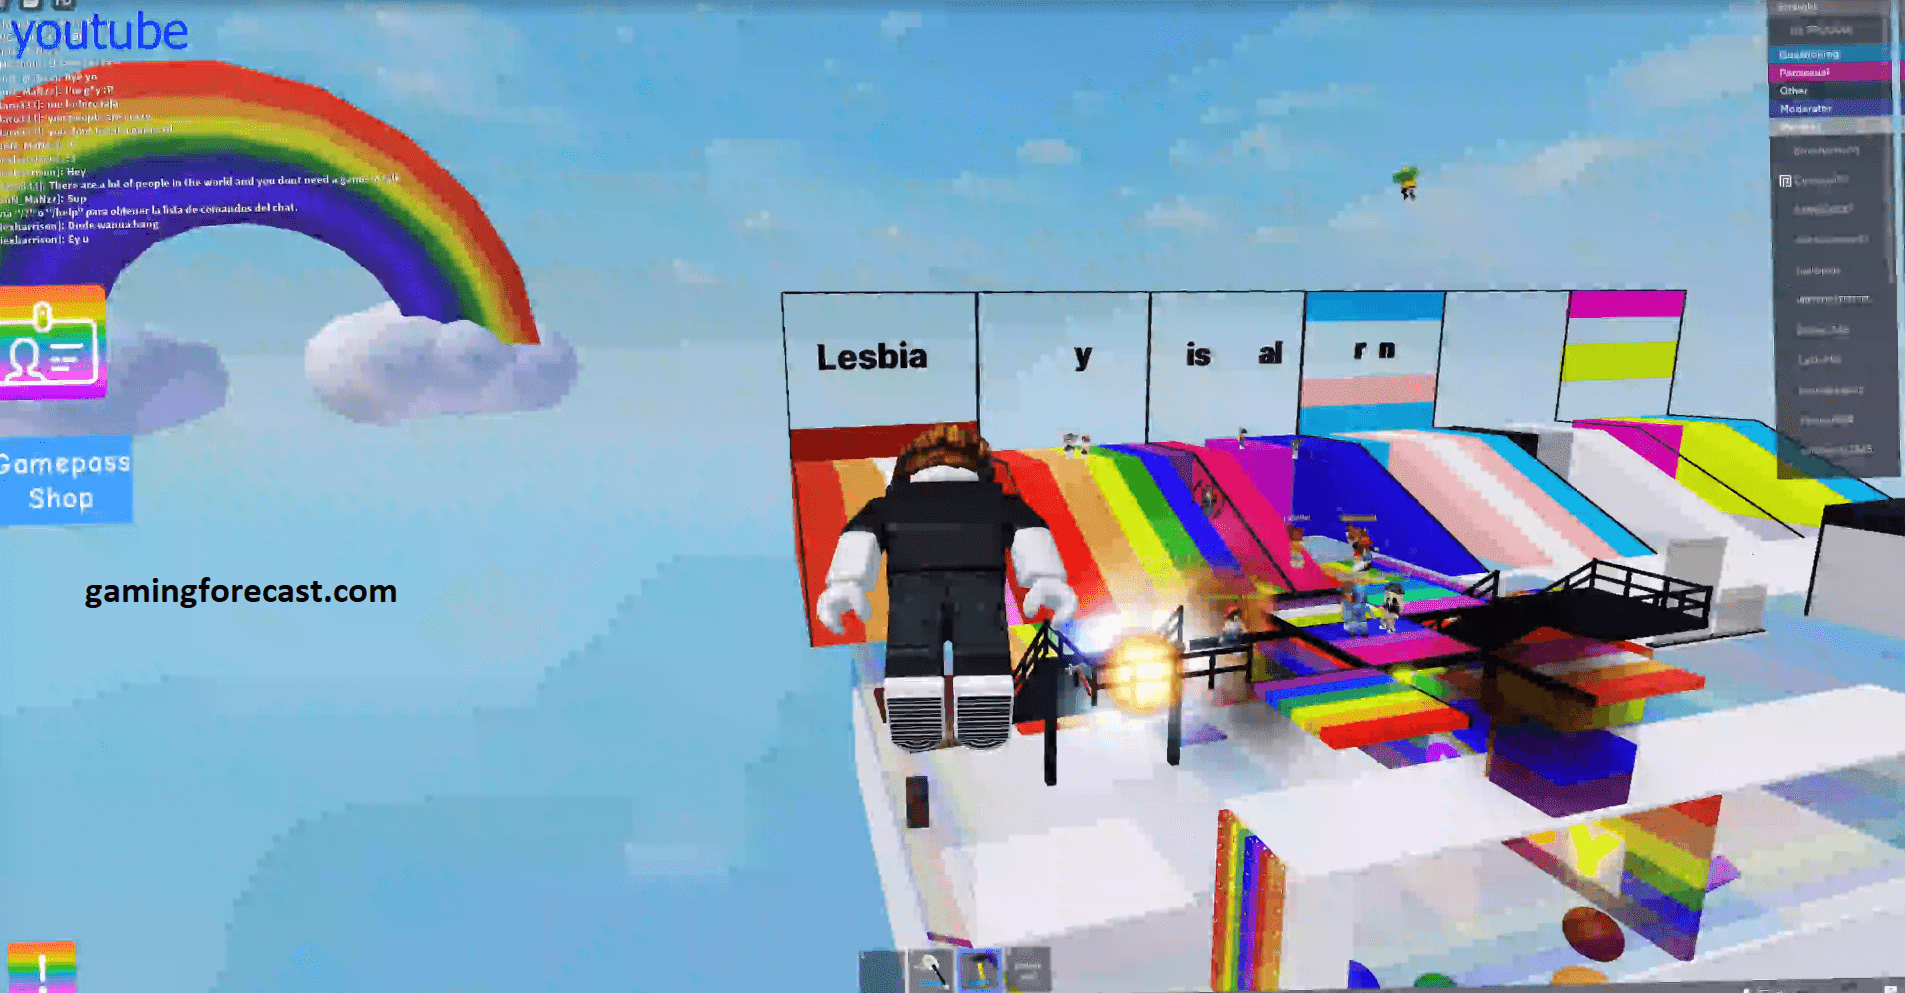 Roblox Hack Download Pc Destroy Lobby Fly Aimbot Scripts 2021 Gaming Forecast Download Free Online Game Hacks - roblox hack cheat